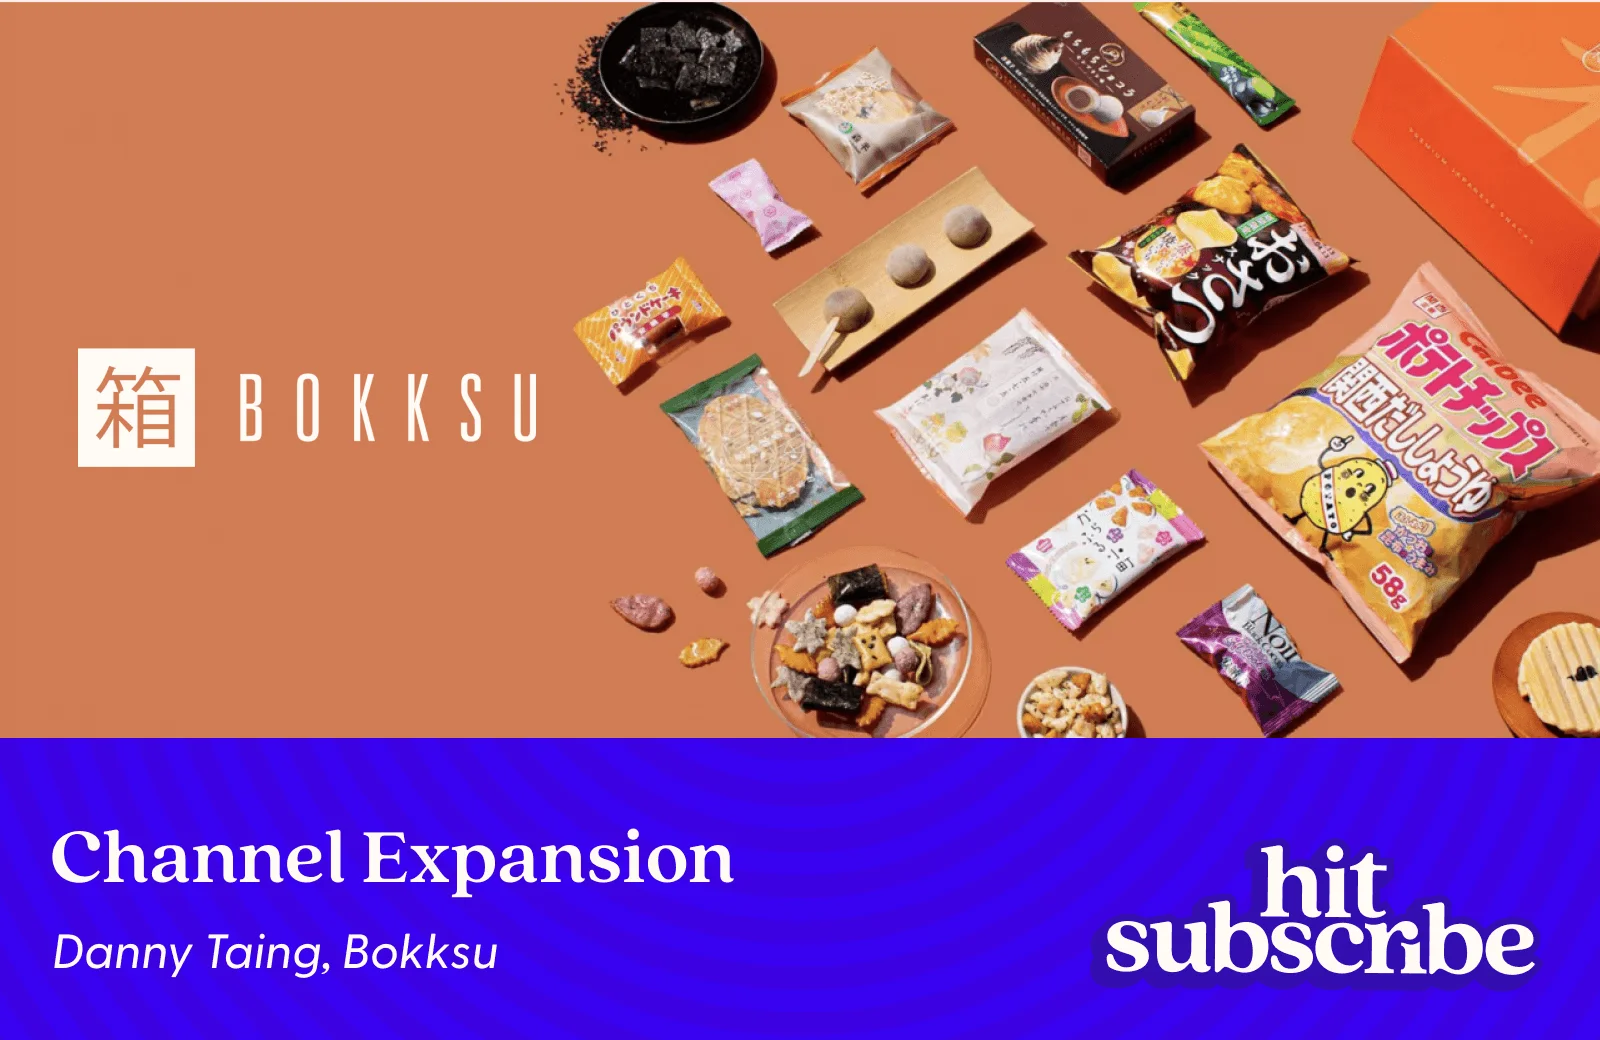 Hit Subscribe podcast episode cover featuring Danny Taing, Founder & CEO, Bokksu